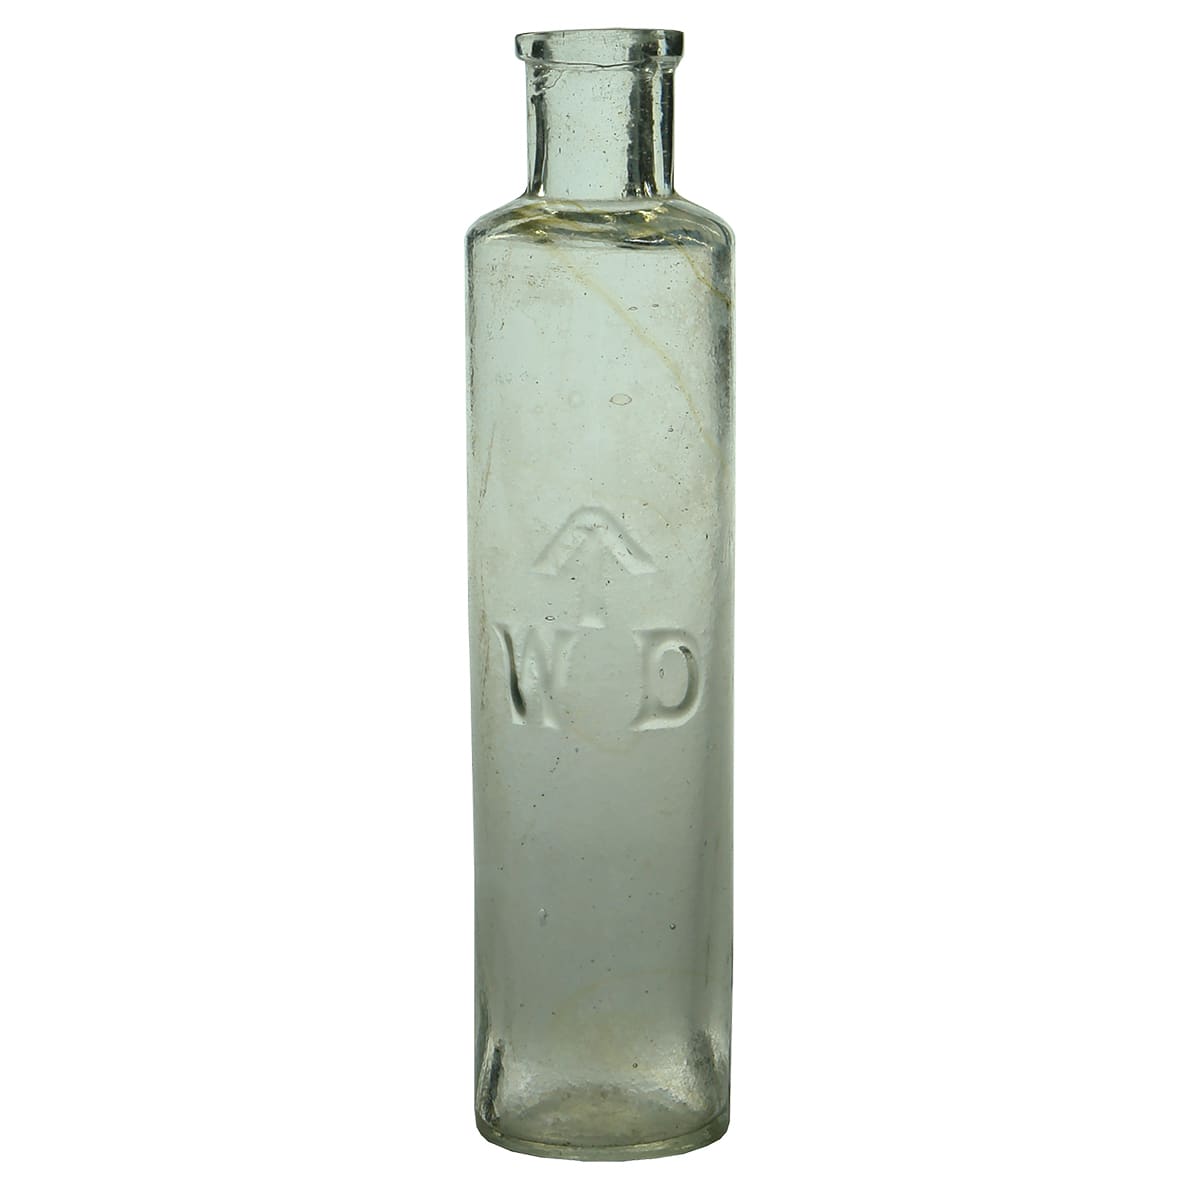 Small vial with Broad Arrow and WD.